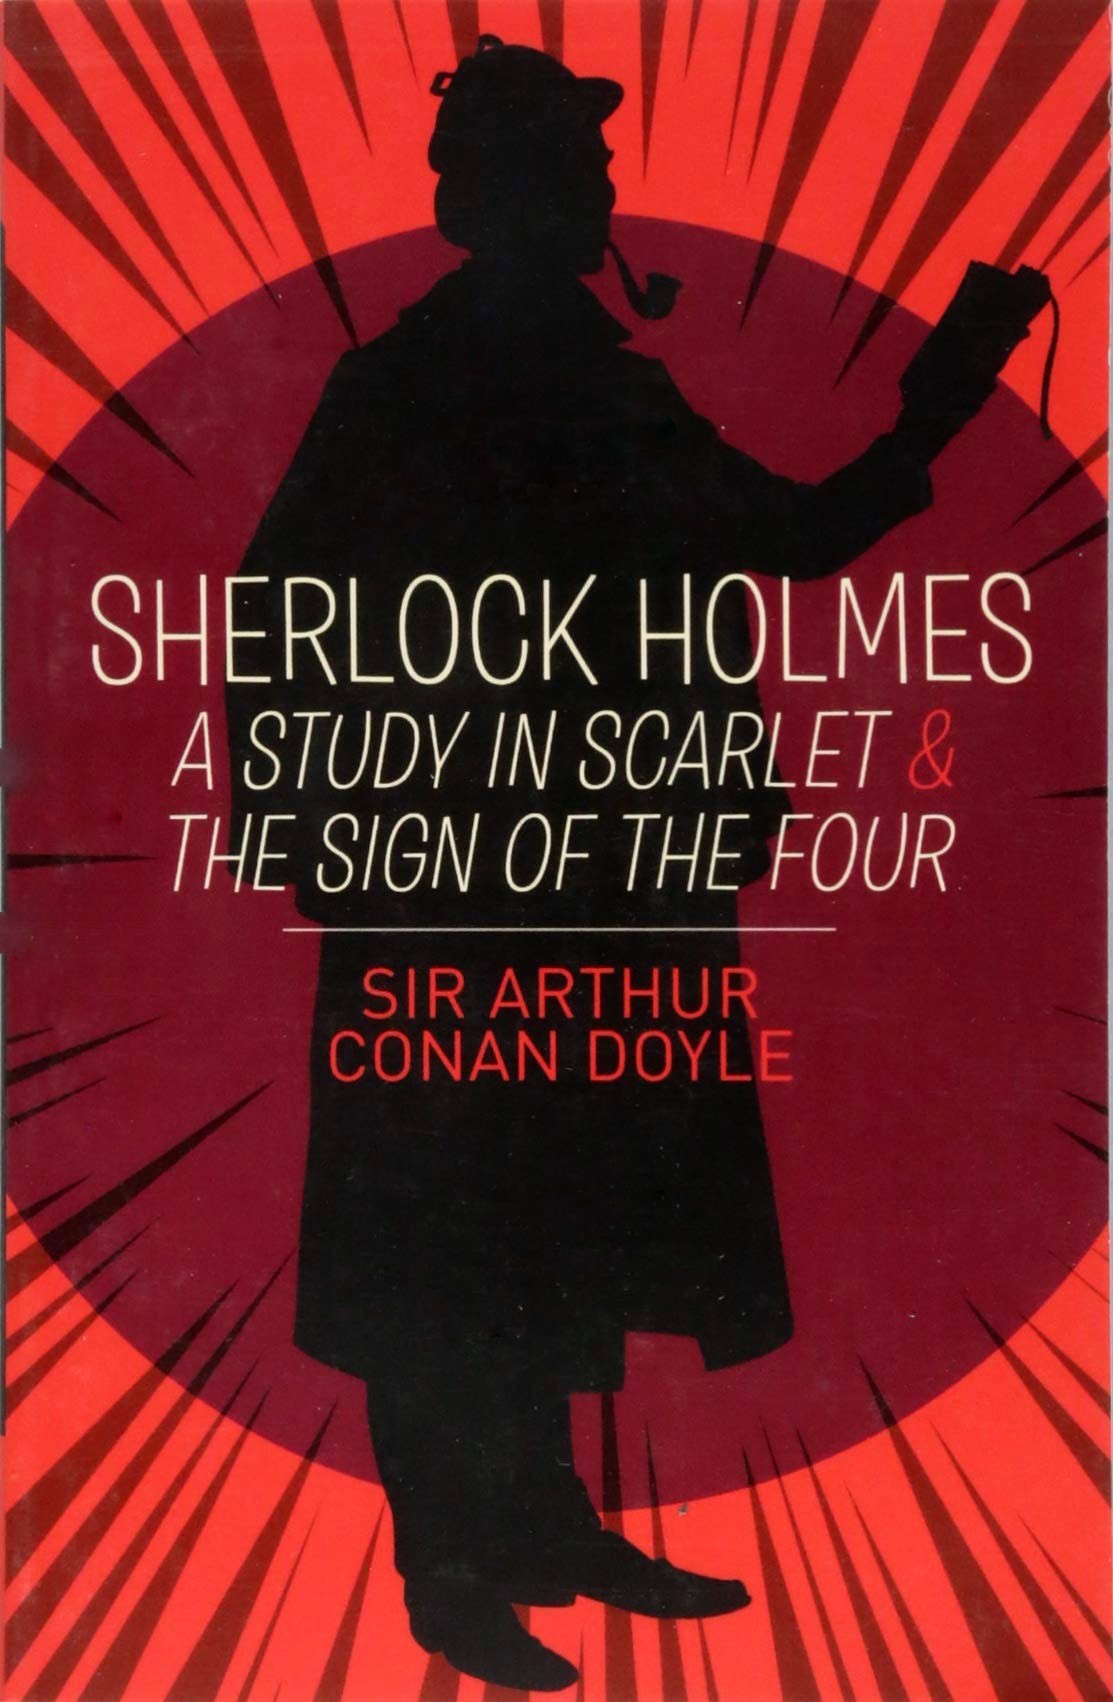 Sherlock Holmes: A Study in Scarlet & The Sign of the Four by Arthur Conan Doyle